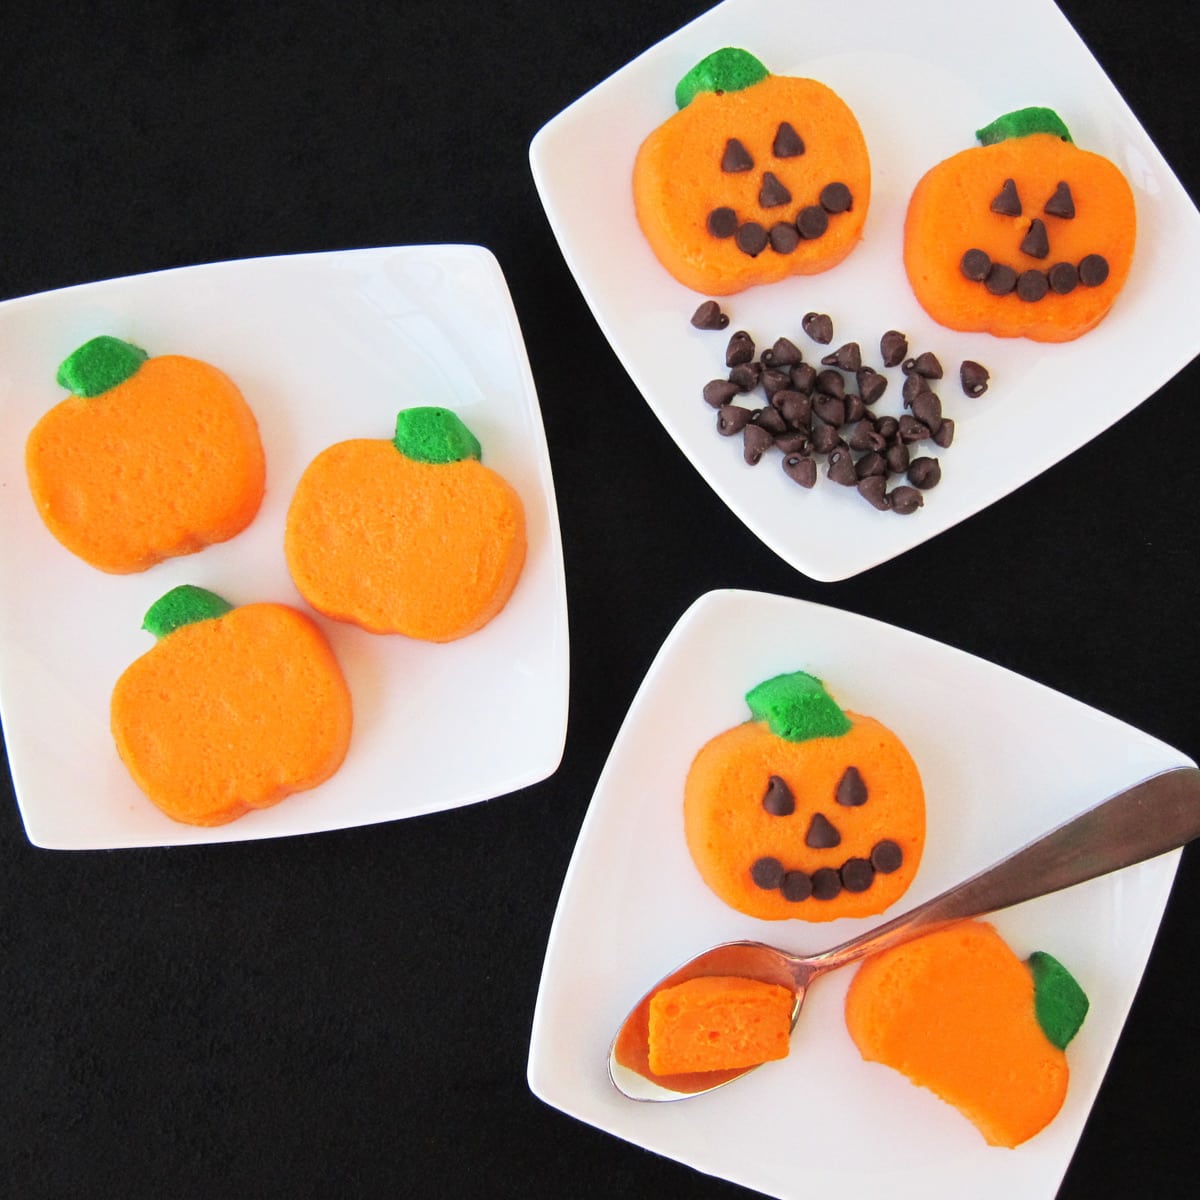 mini cheesecake pumpkins served plain or decorated to look like Jack-O-Lanterns with chocolate chip faces.